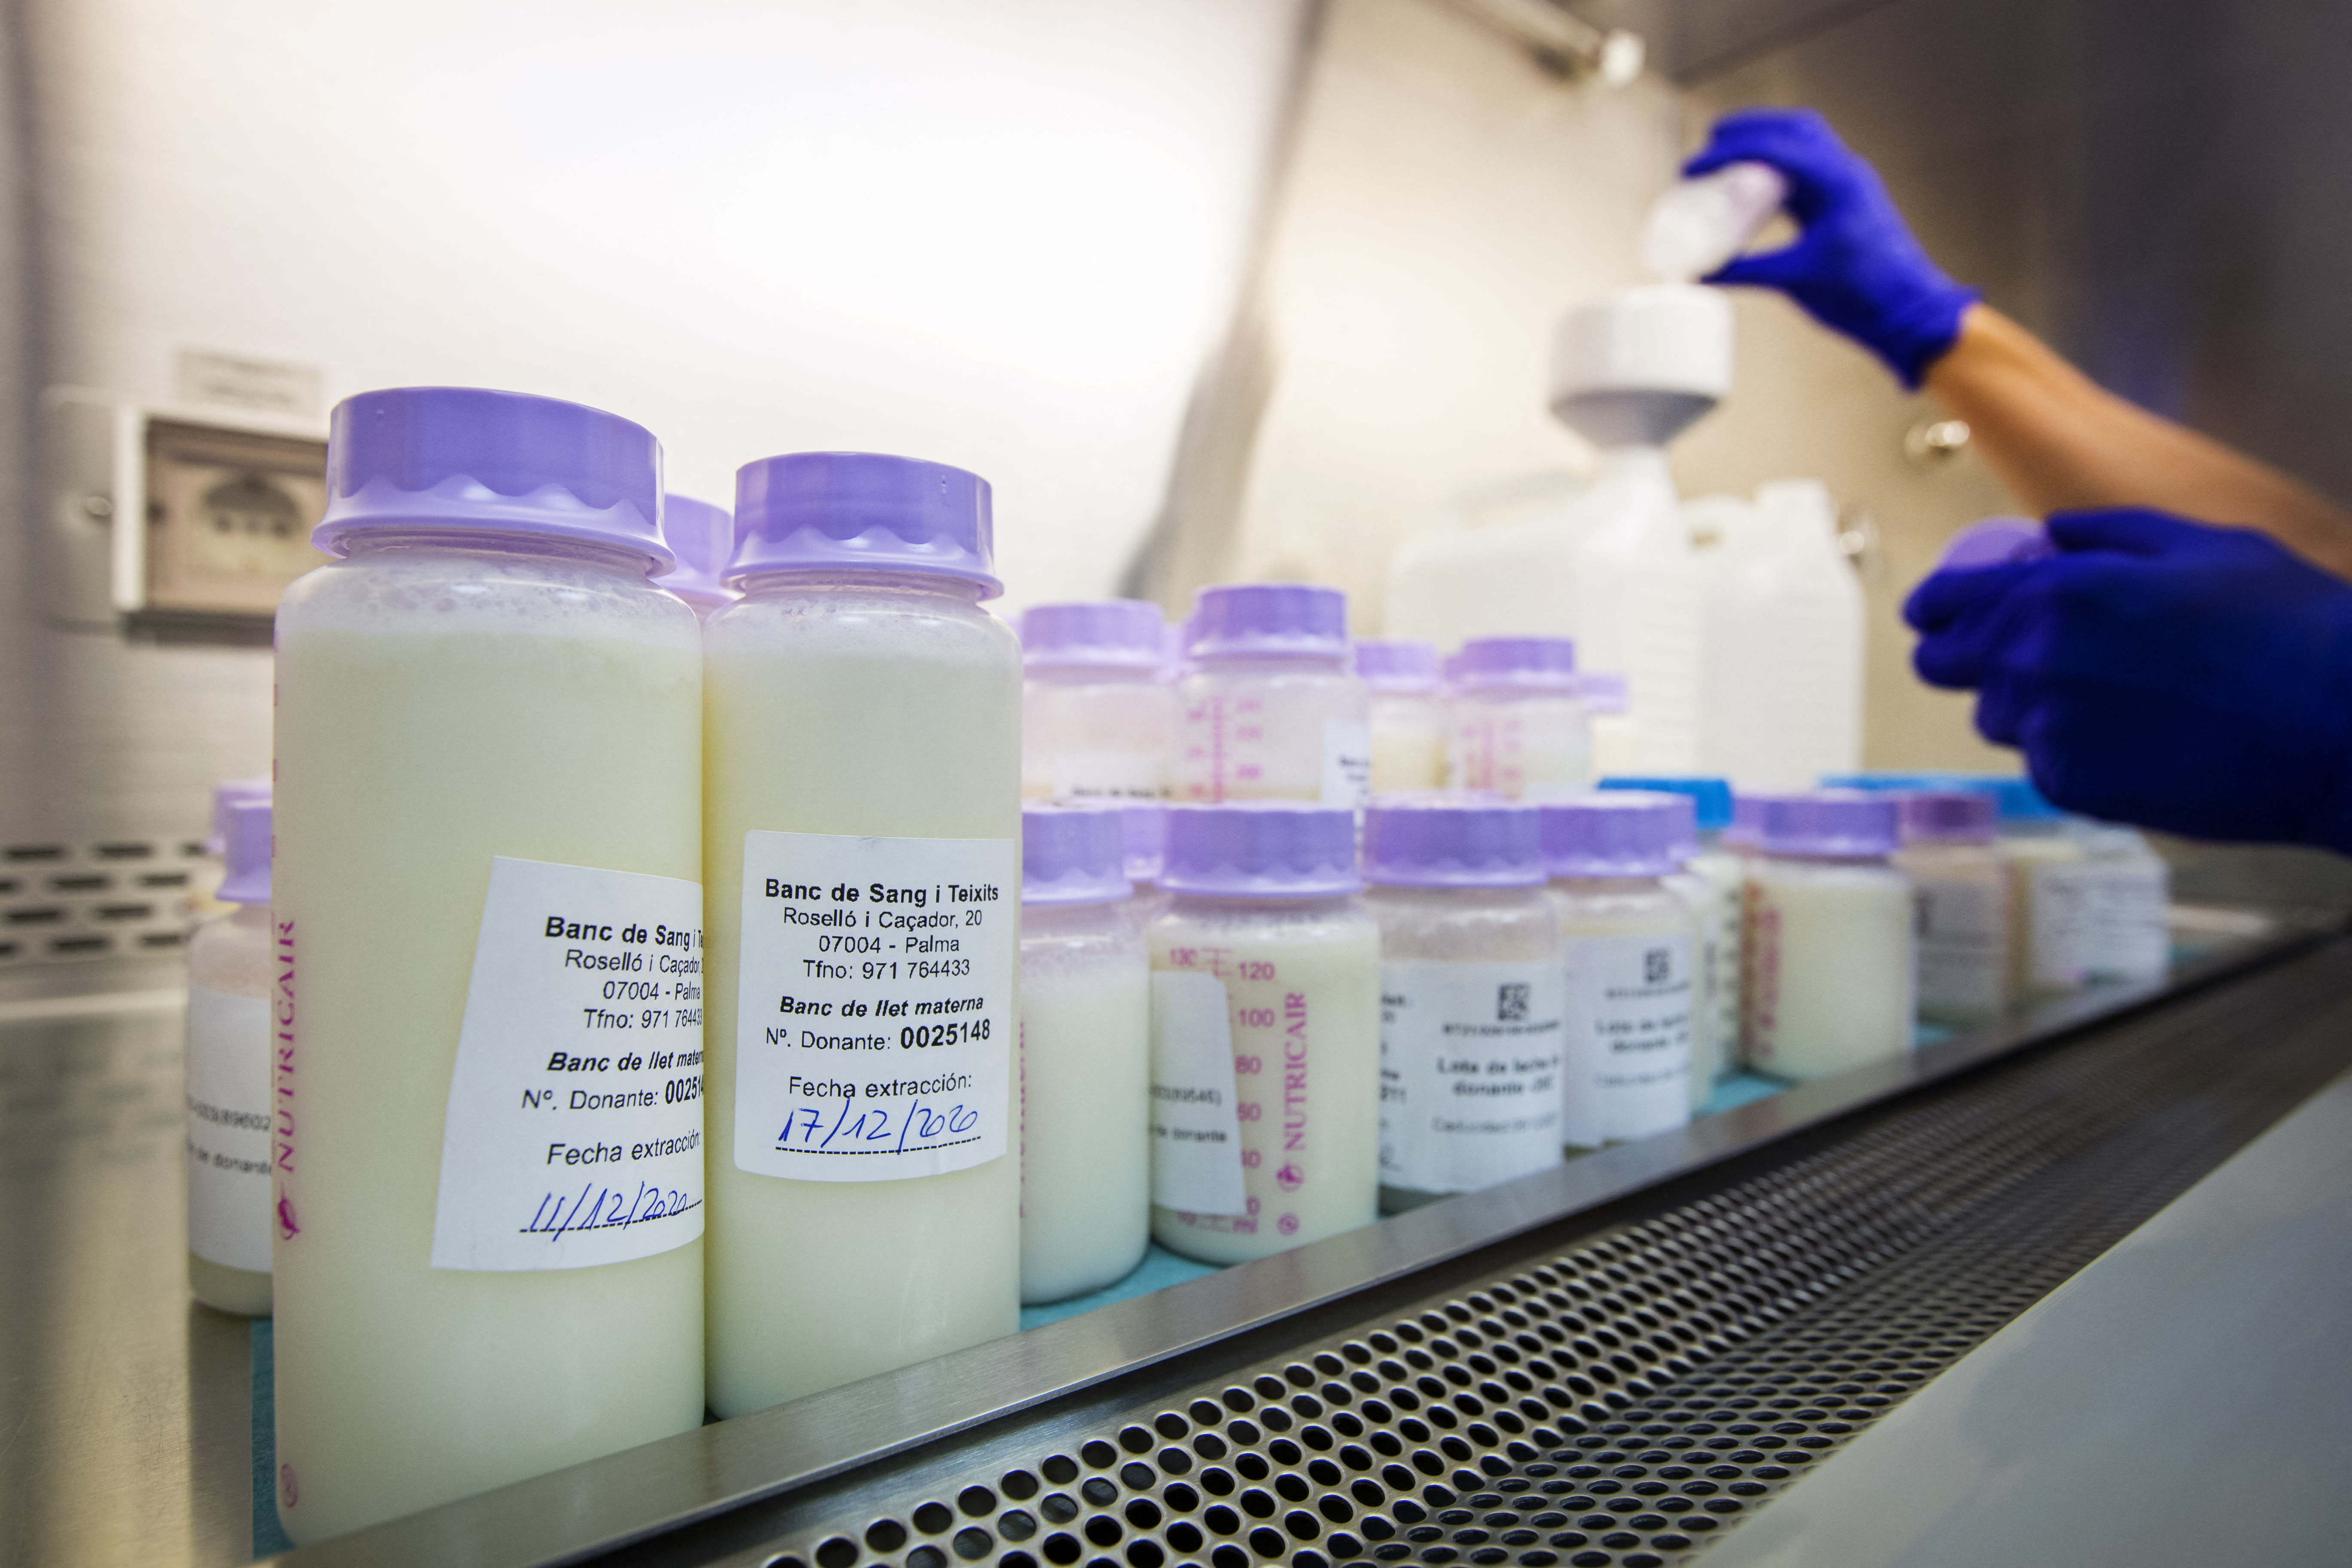 Bottles of donated breast milk are stored at the Breast Milk Bank of the Balearic Islands' Banc de Sang i Teixits (tissues and boold bank) in Palma de Mallorca.